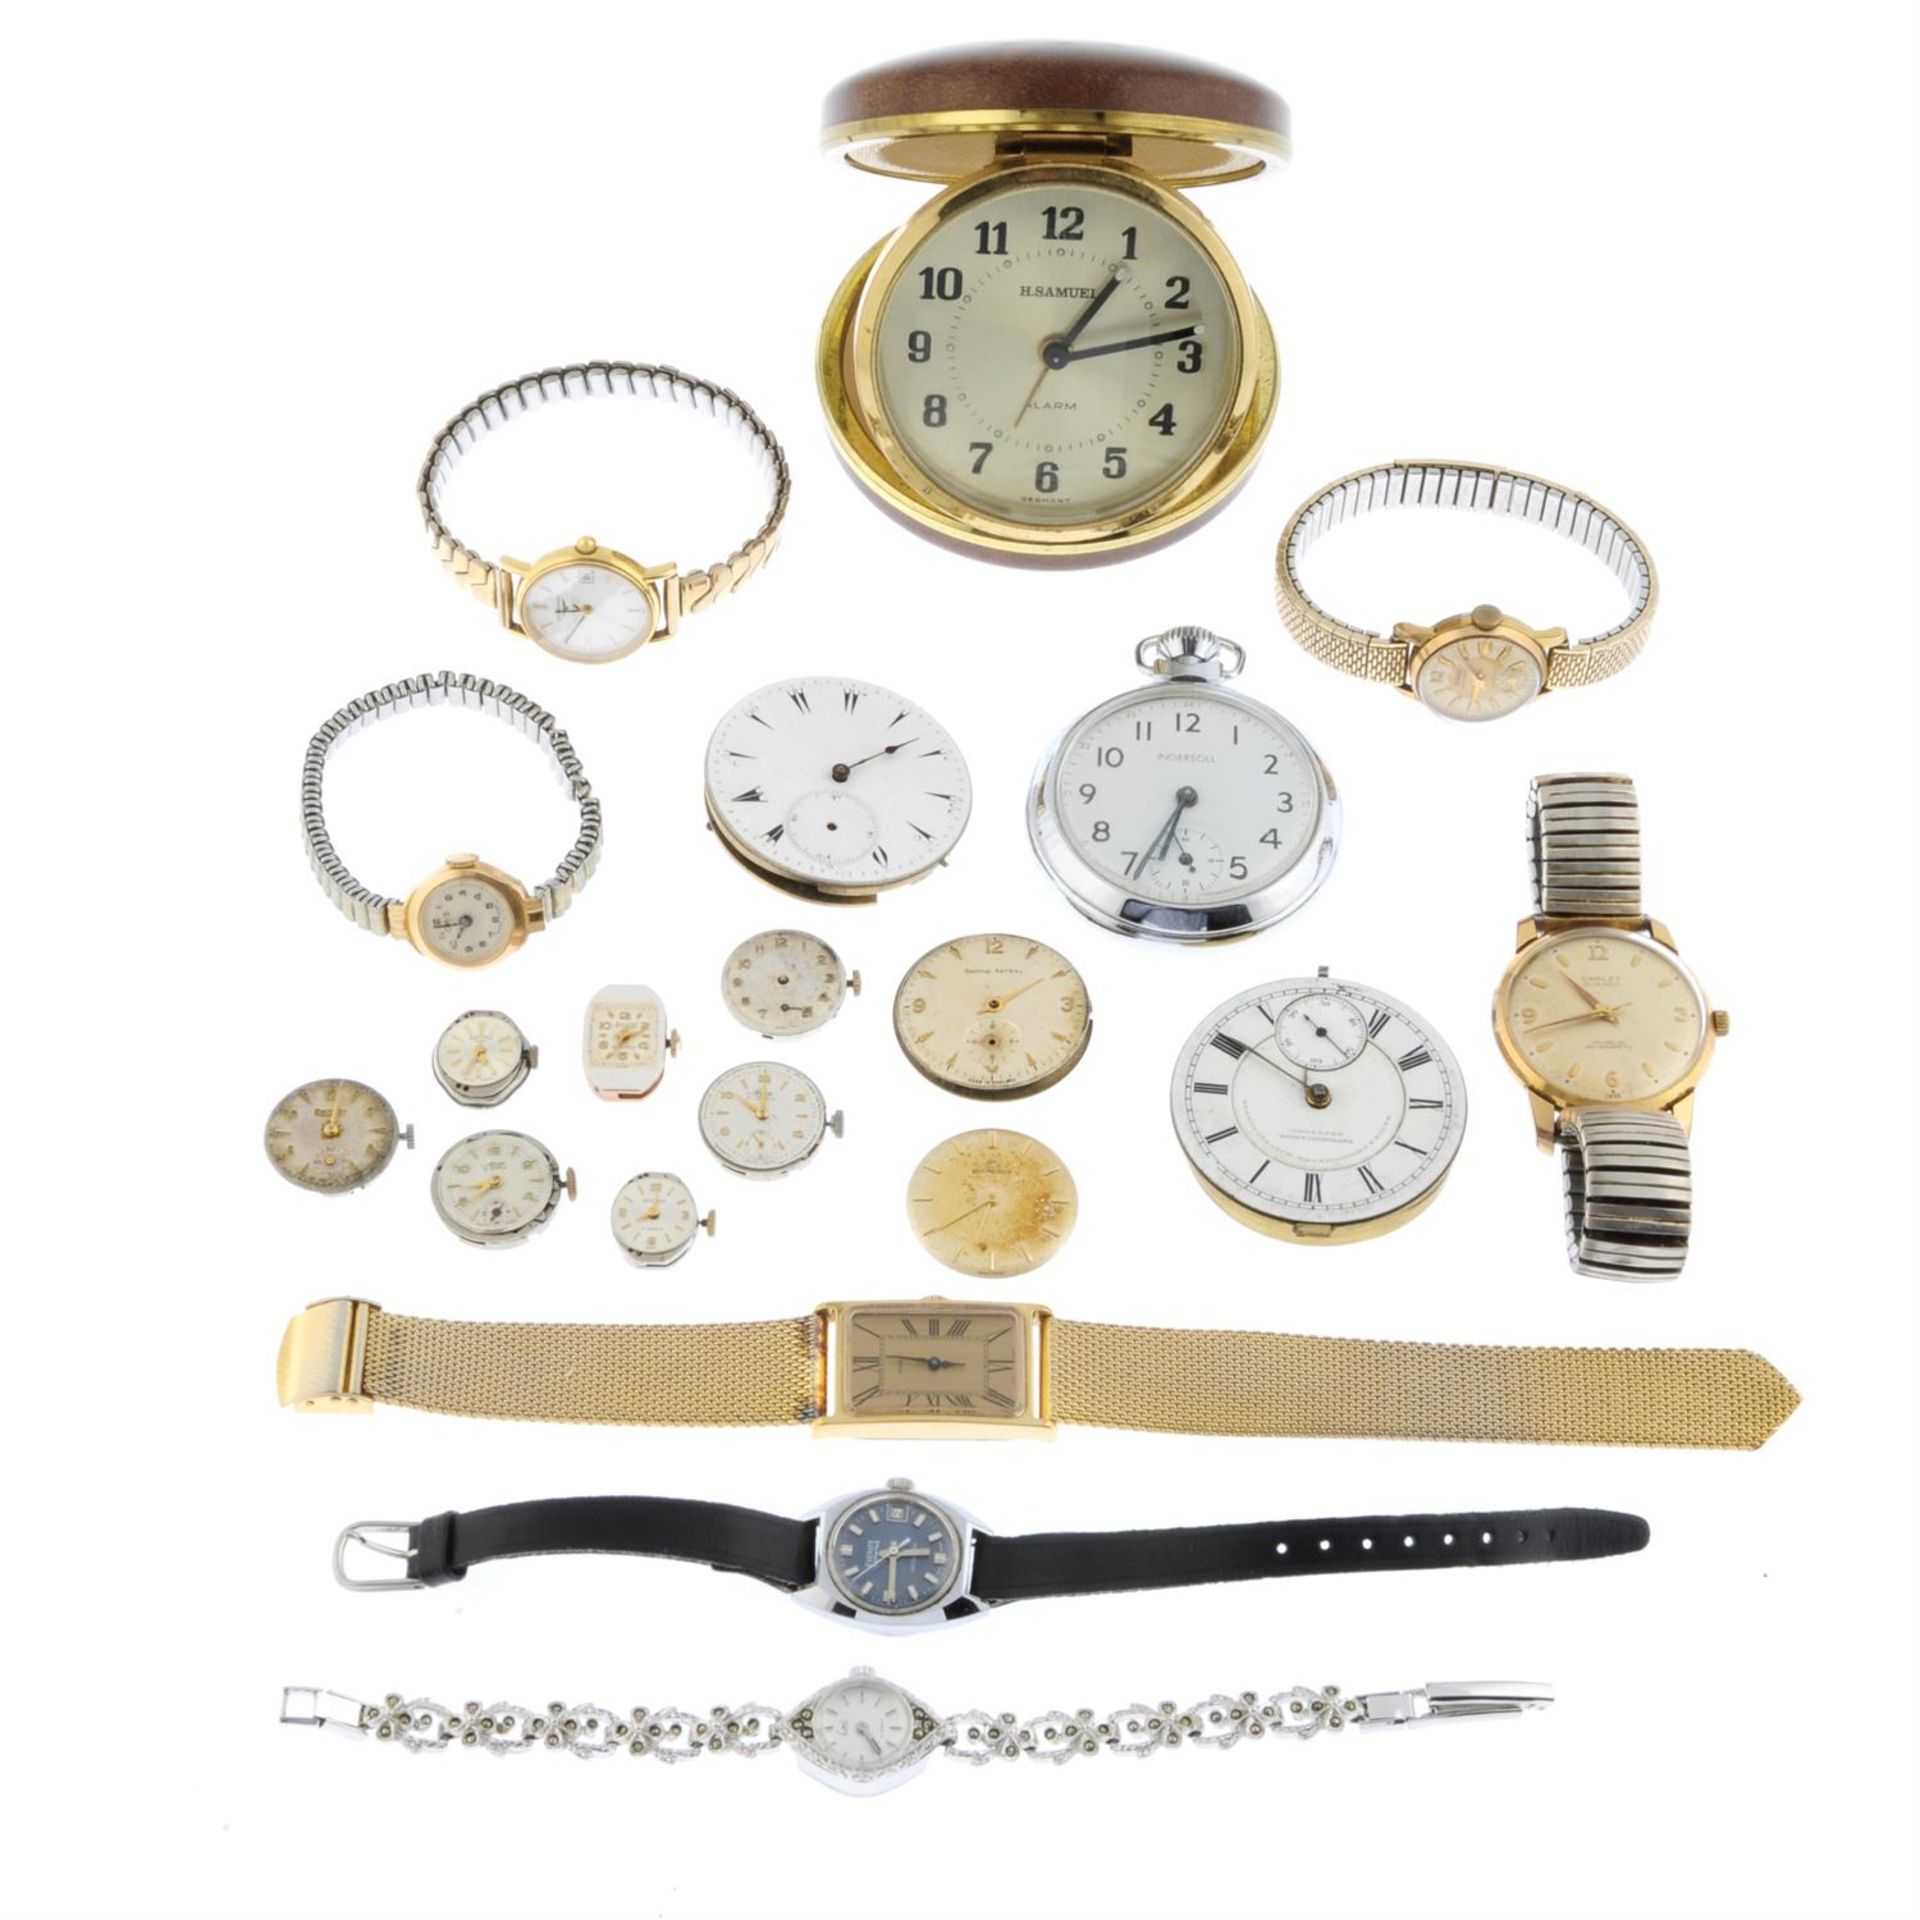 A group of seven assorted watches with pocket watch and watch movements.